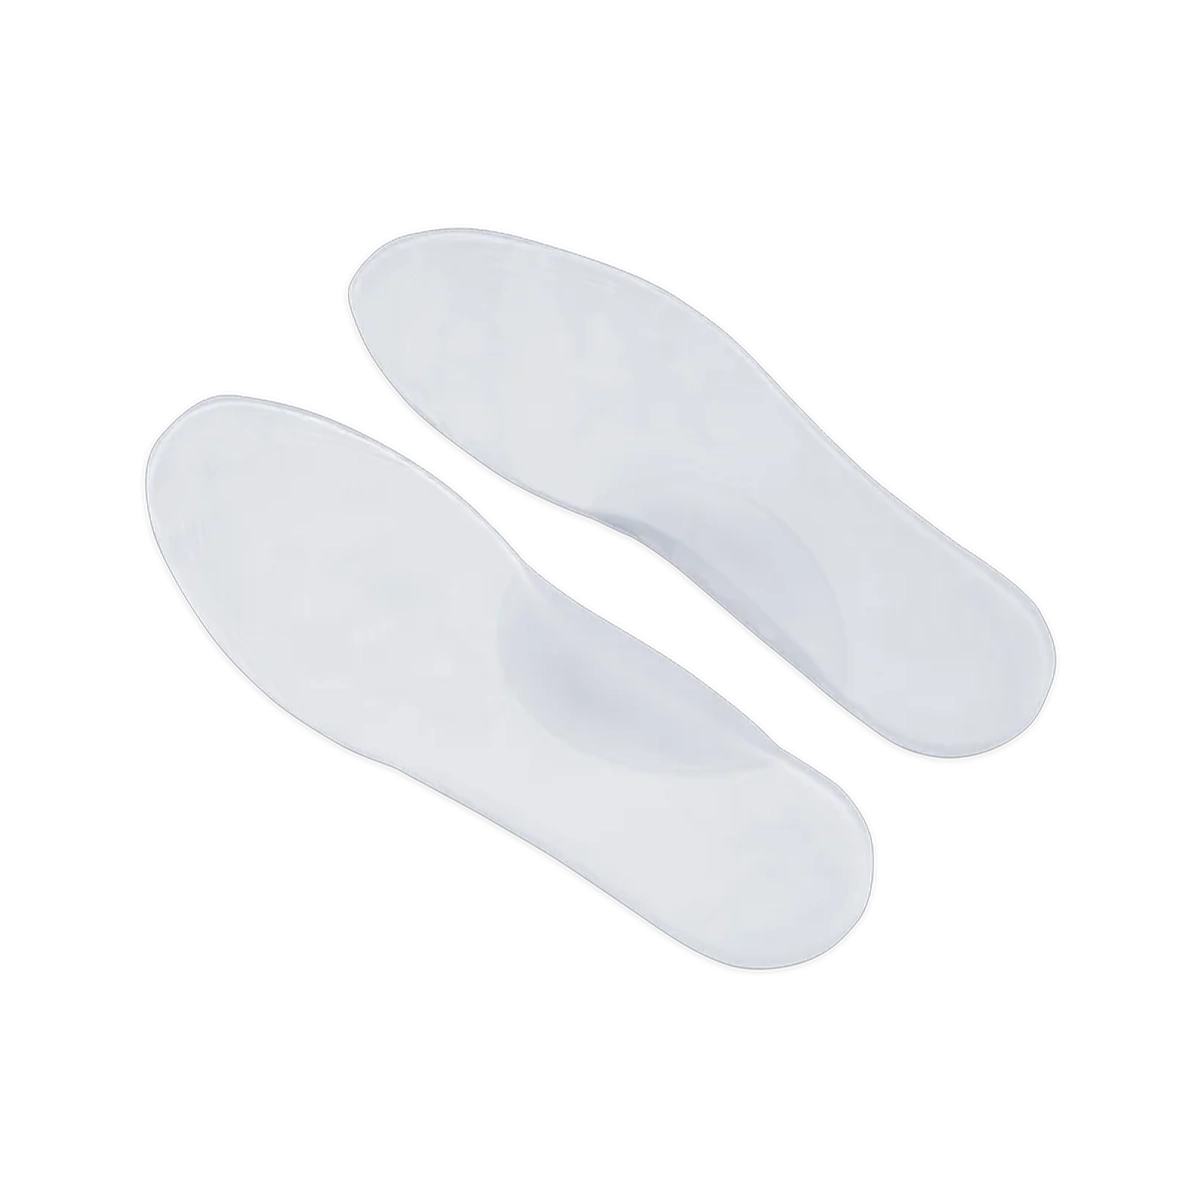 First product image of Flamingo Silicone Medial Arch Insole (Pair) OC 2357 Universal